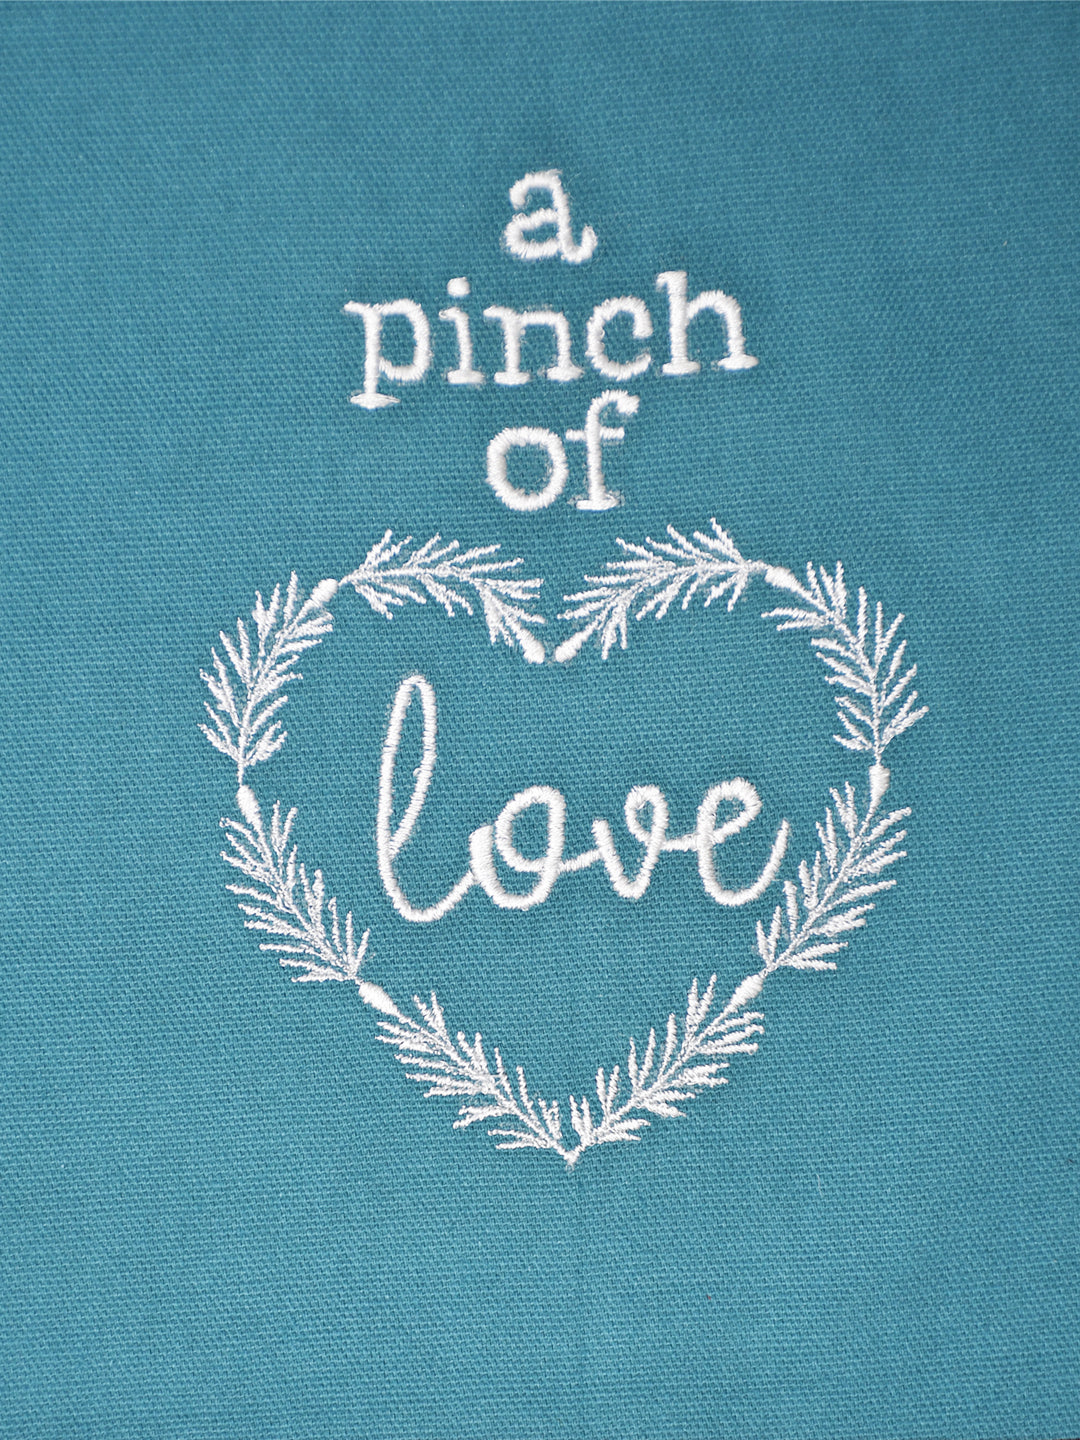 Pinch of Love Teal Cotton Printed Apron